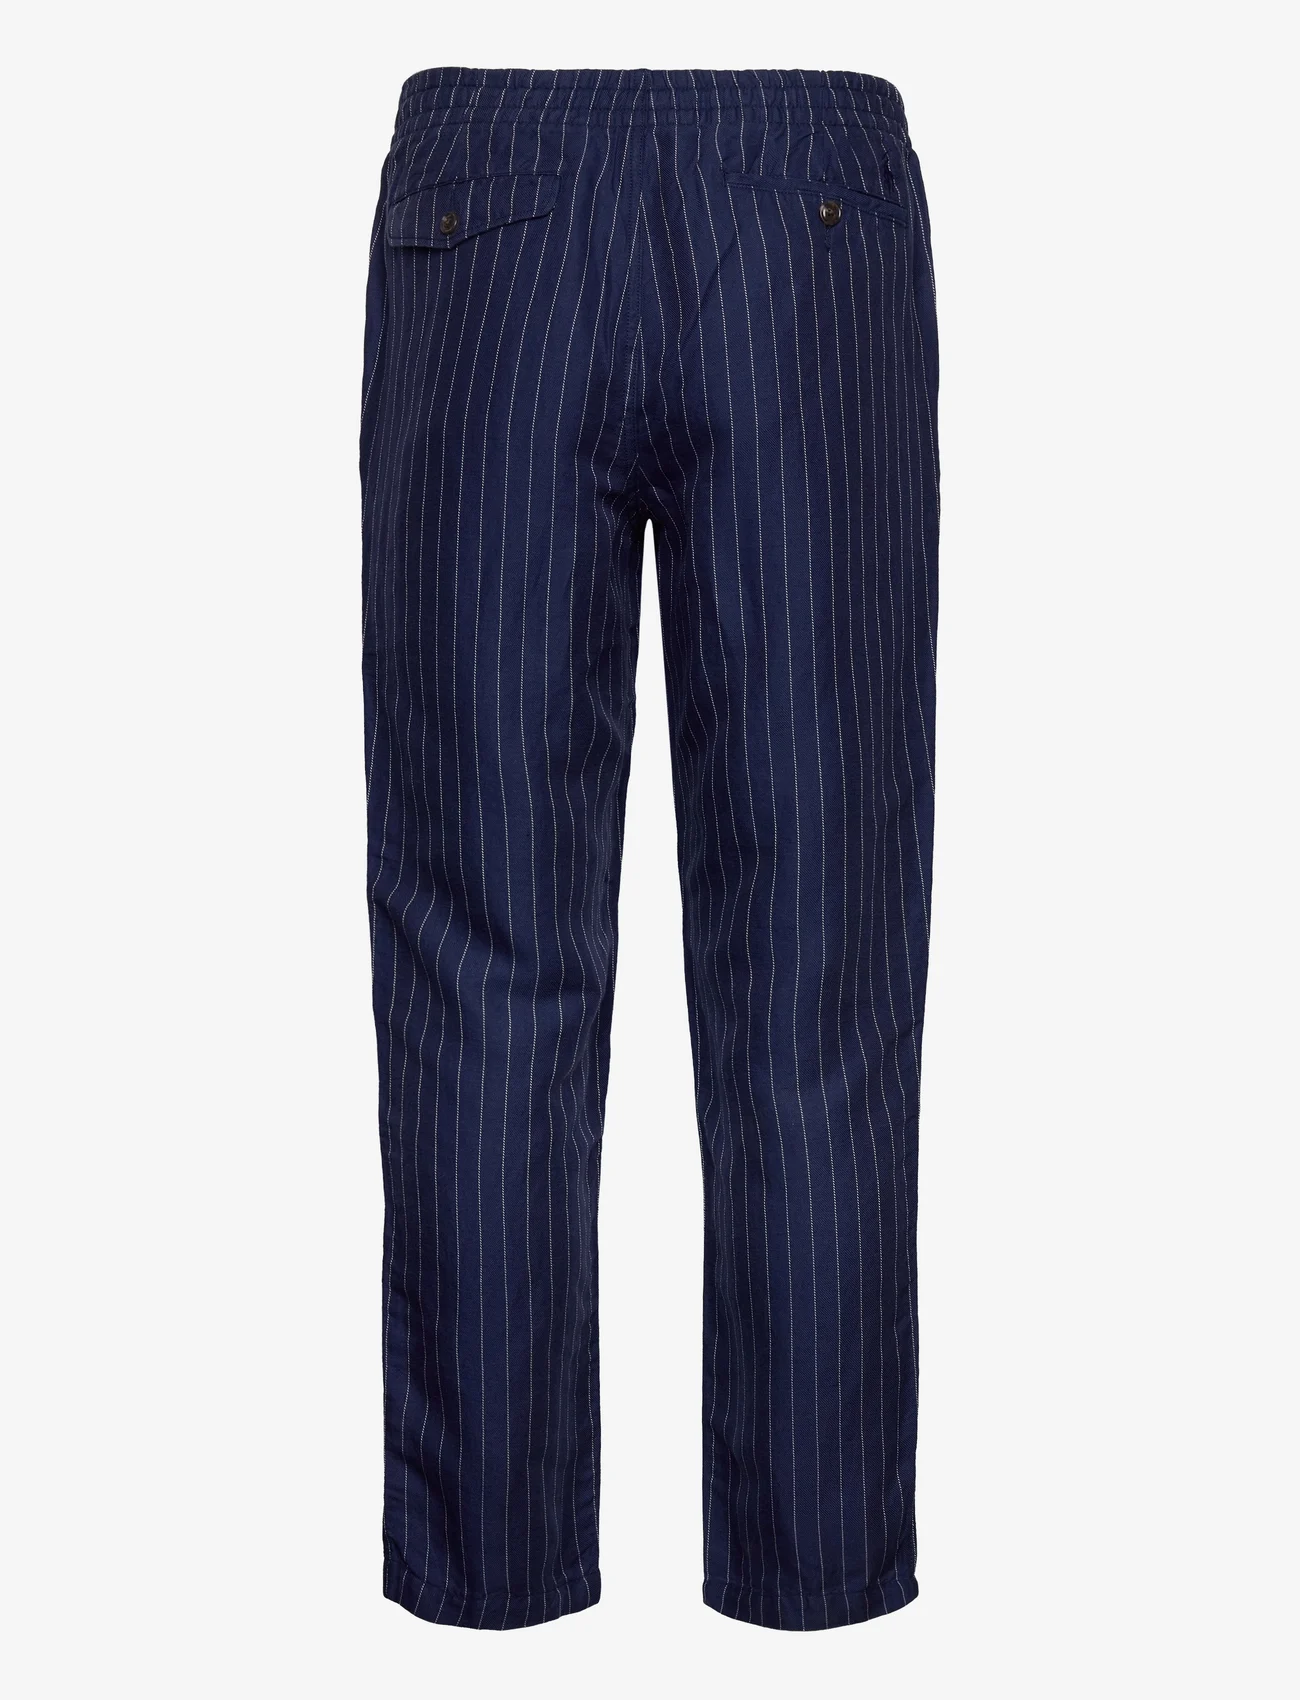 Polo Ralph Lauren - Polo Prepster Classic Fit Twill Pant - rennot housut - navy pinstripe - 1